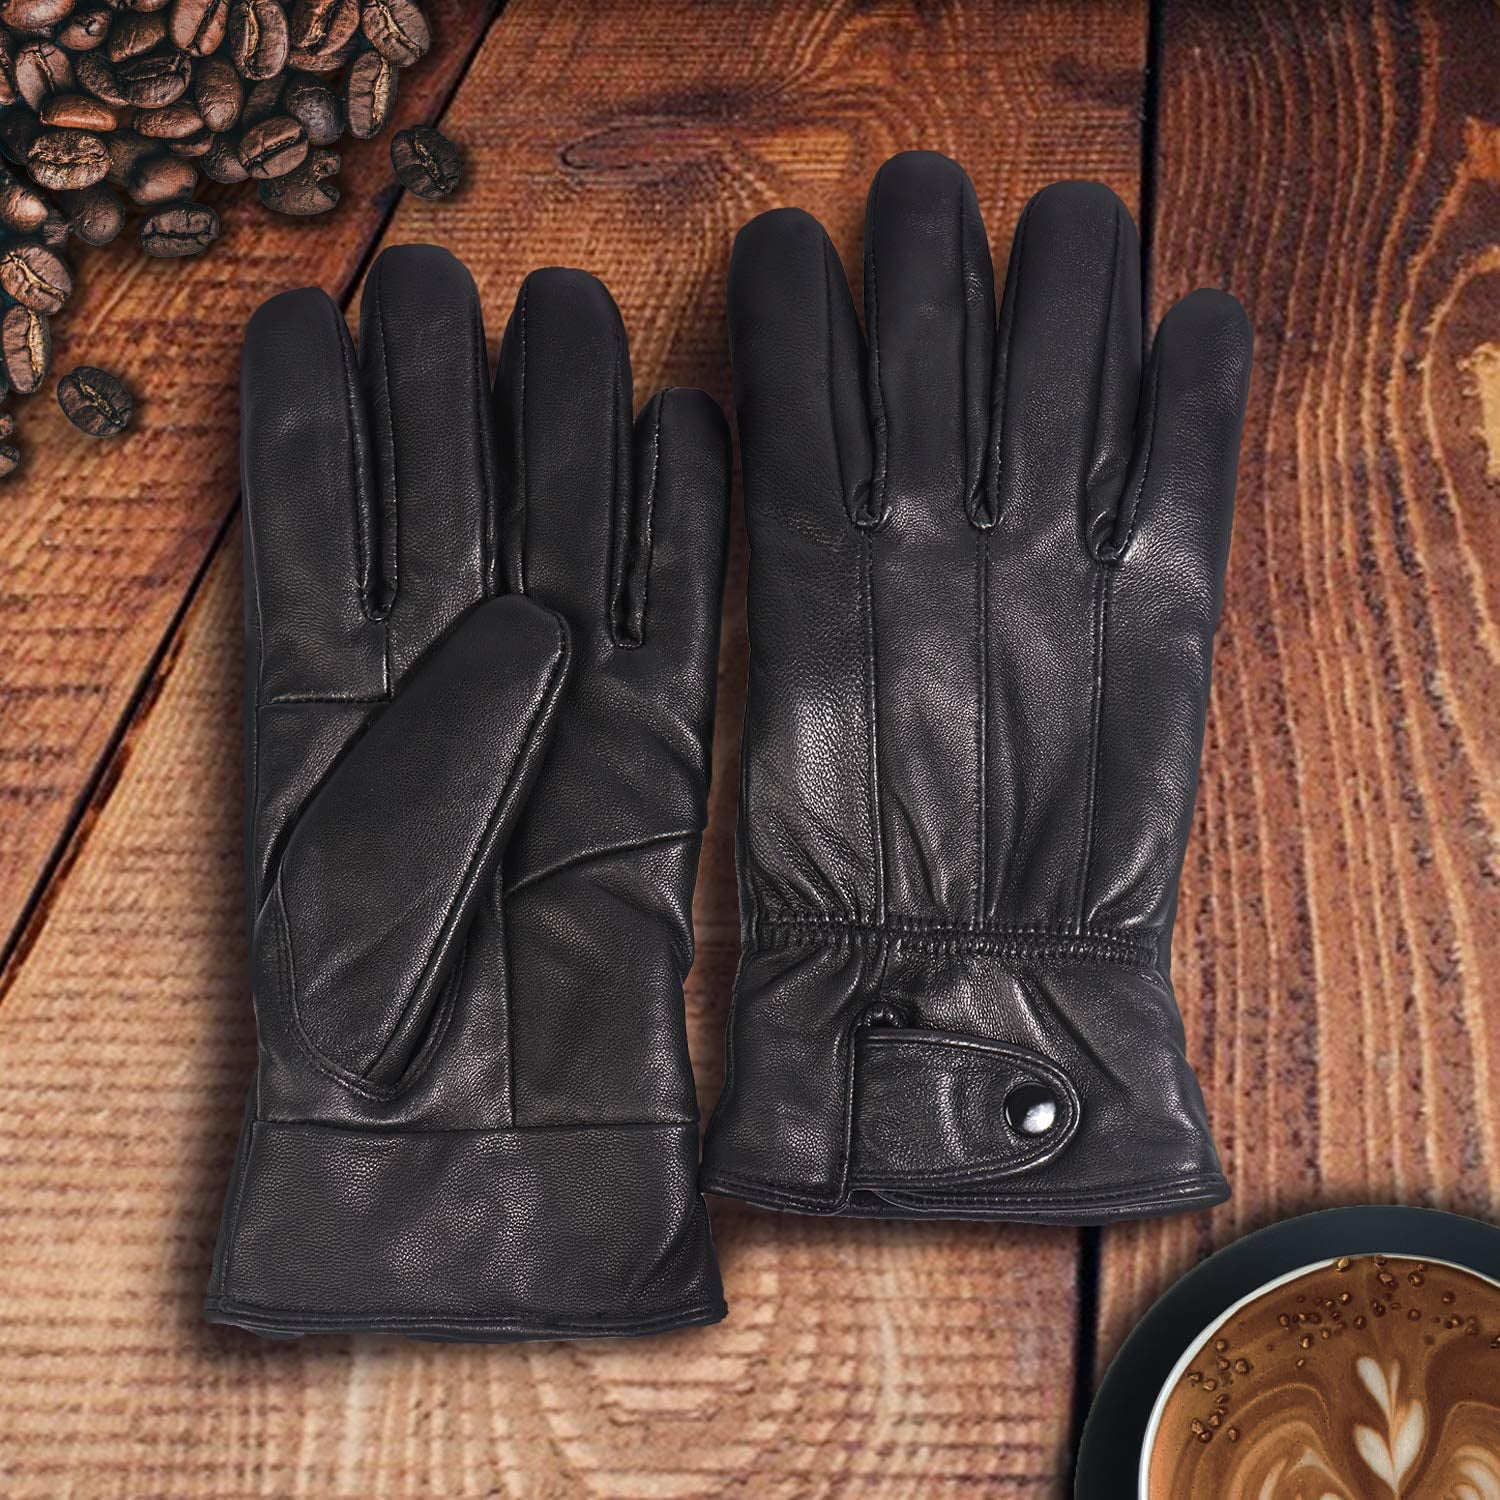  UXZDX Ladies Sheepskin Black Gloves Leather Fashion Winter  Warmth Beautiful Leather (Color : Black, Size : 9) : Clothing, Shoes &  Jewelry